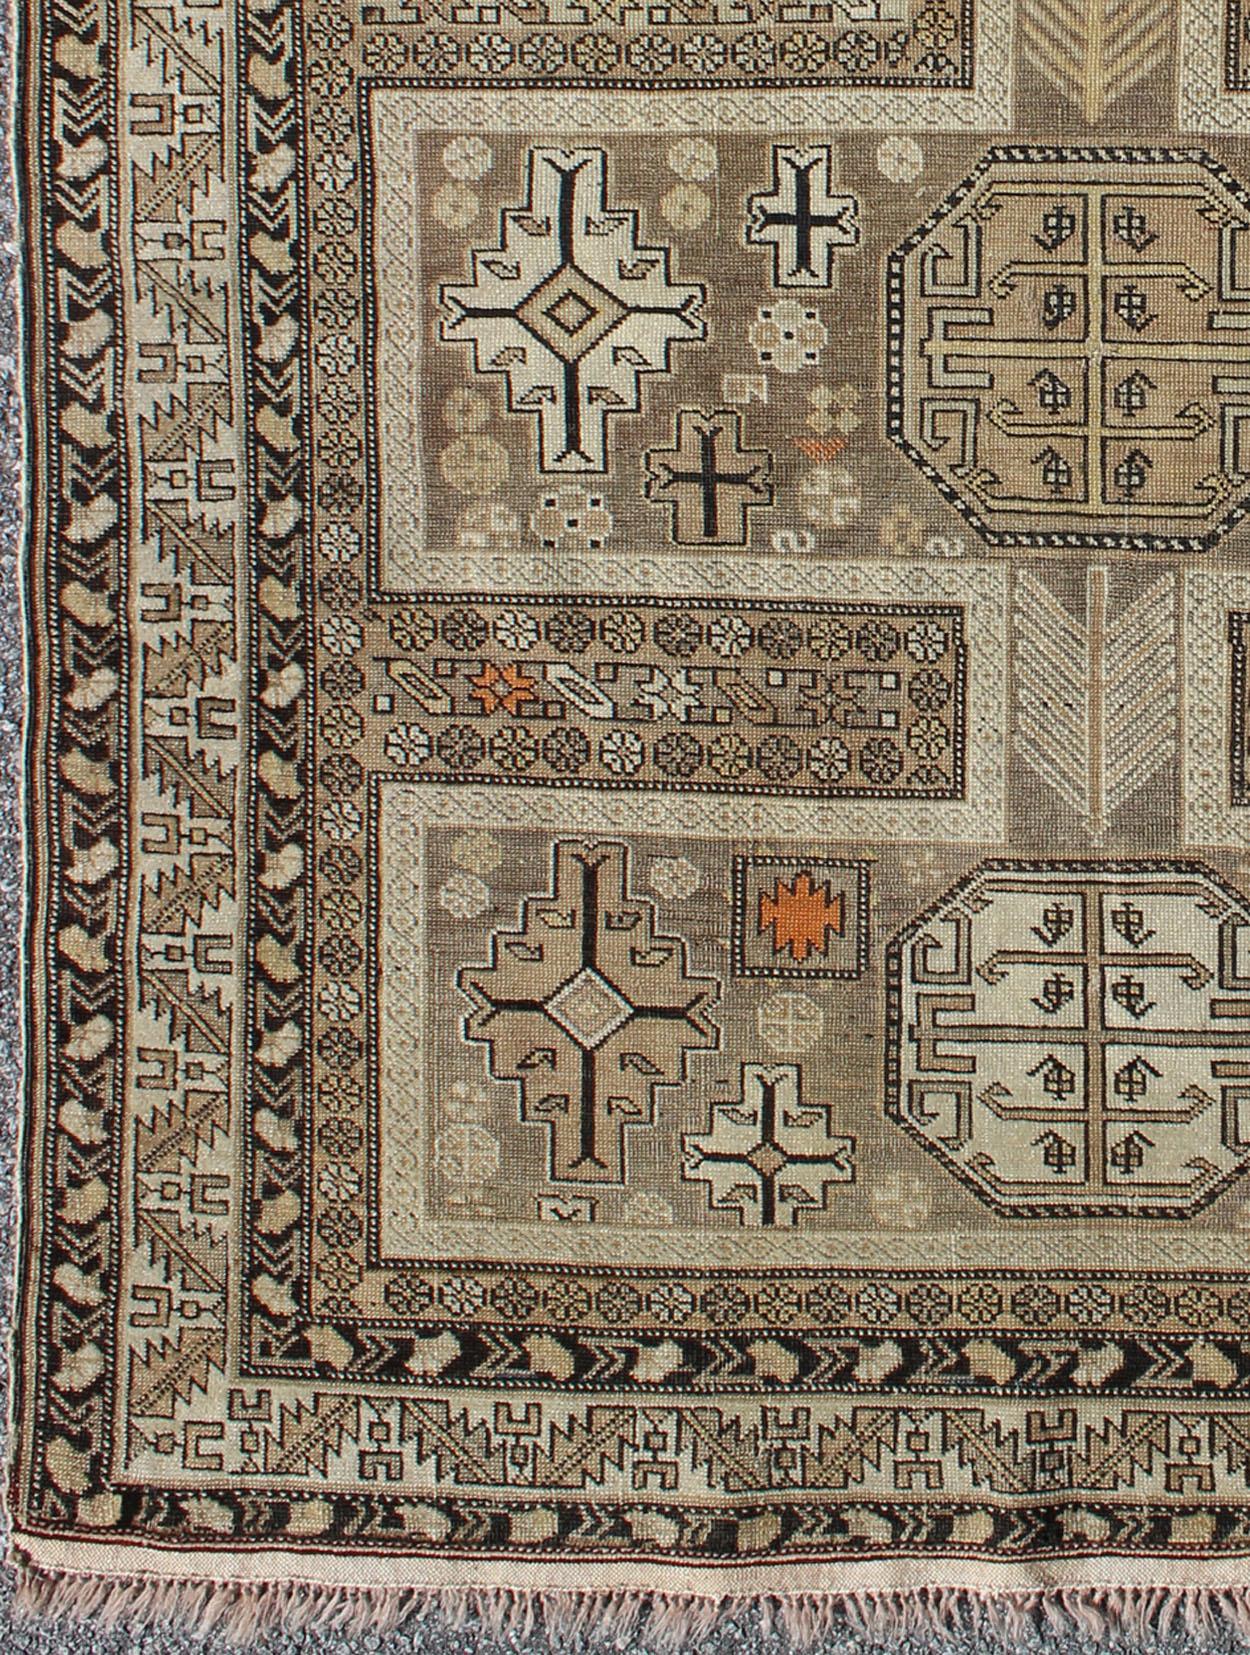 Antique Tribal Caucasian Rug with All-Over Motif in Muted Neutrals. 
Country of Origin: Caucasus; Type: Caucasian; Design: Tribal; Keivan Woven Arts: rug 16-0922. 
Measures: 3'10 x 4'5
The field of this Caucasian piece features all-over tribal